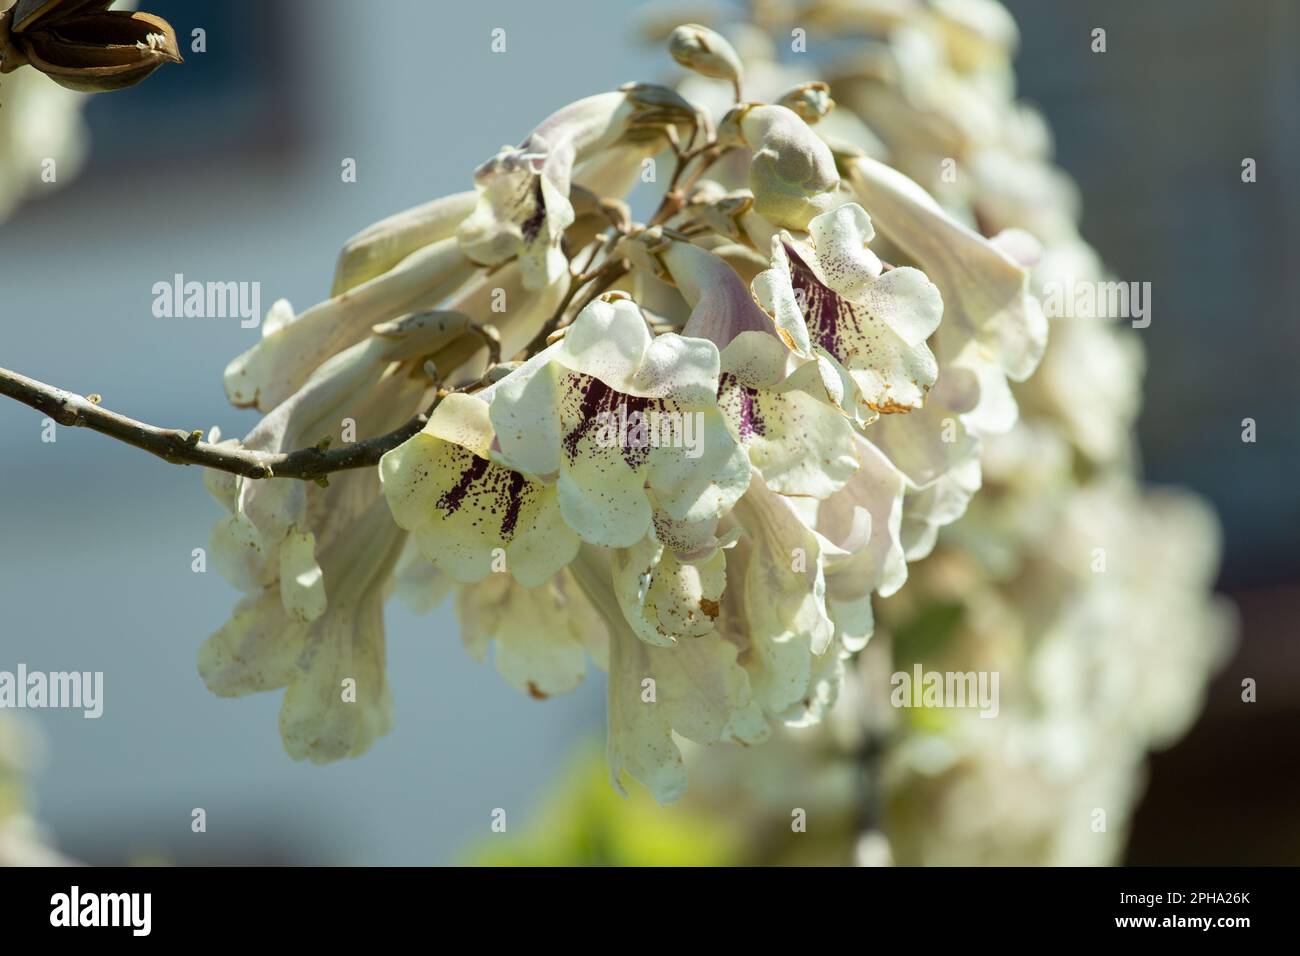 White flowers of paulownia tree blossoming in the park, spring. Stock Photo